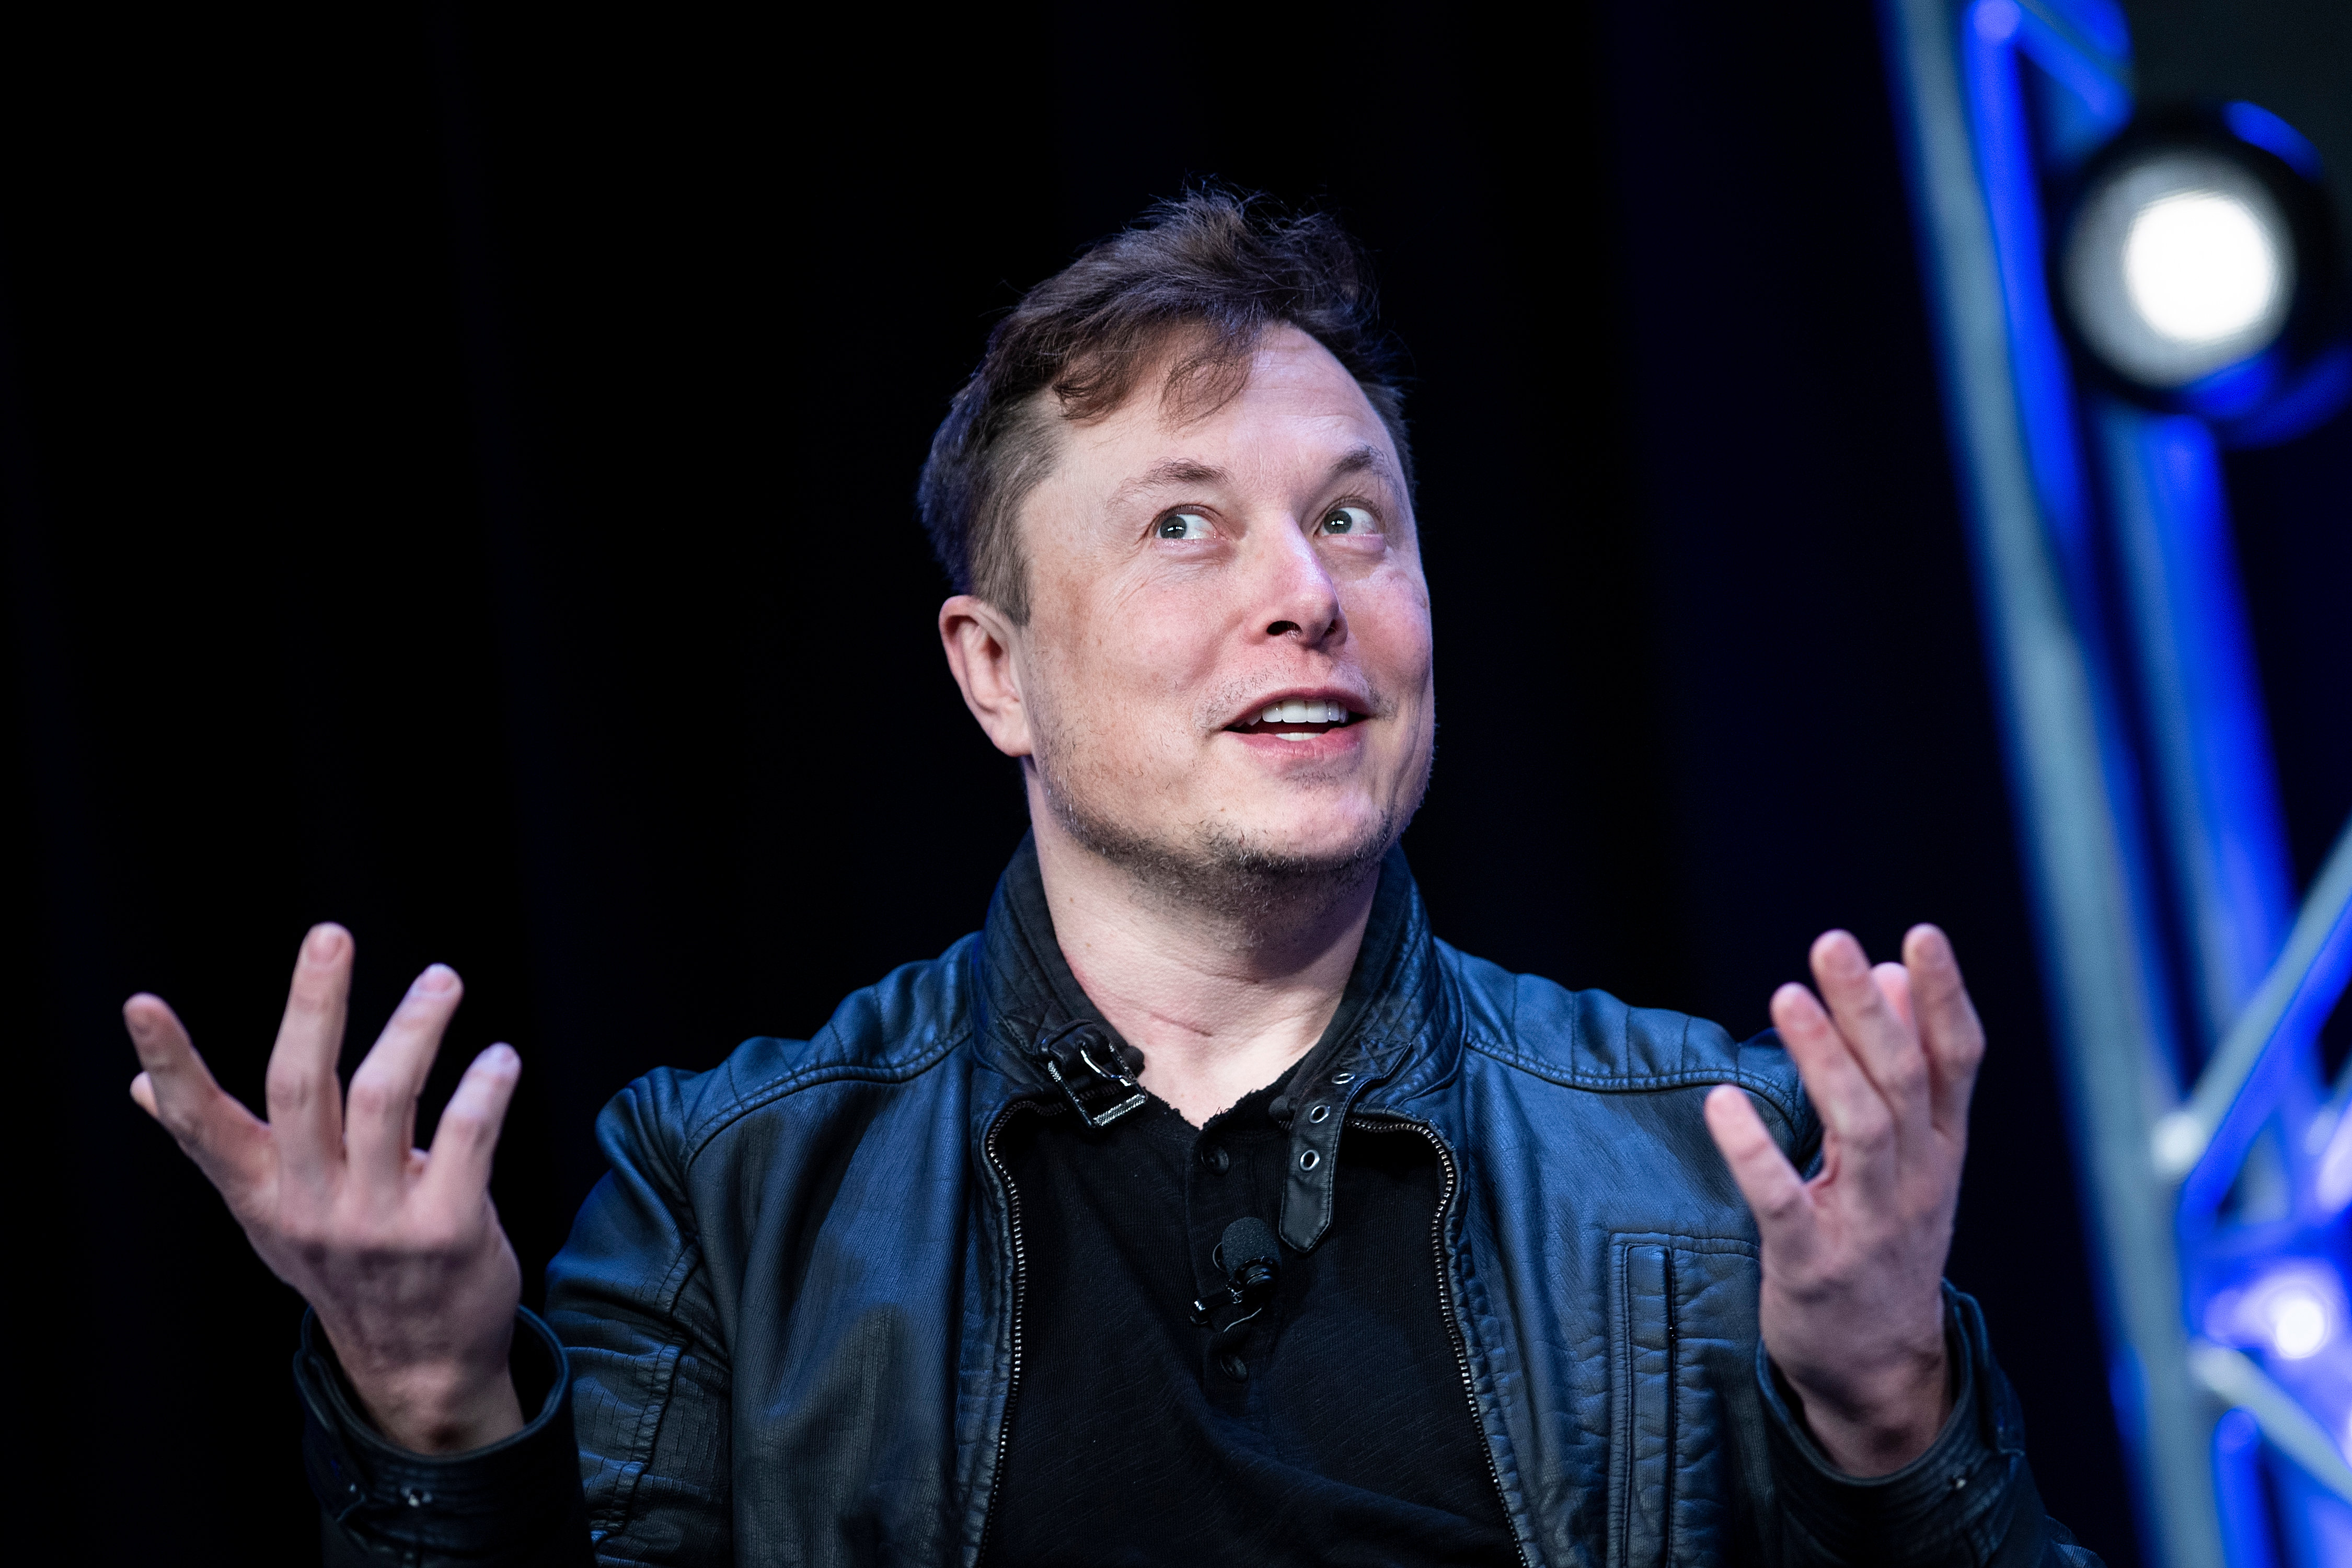 Elon Musk lost the title of richest person in the world